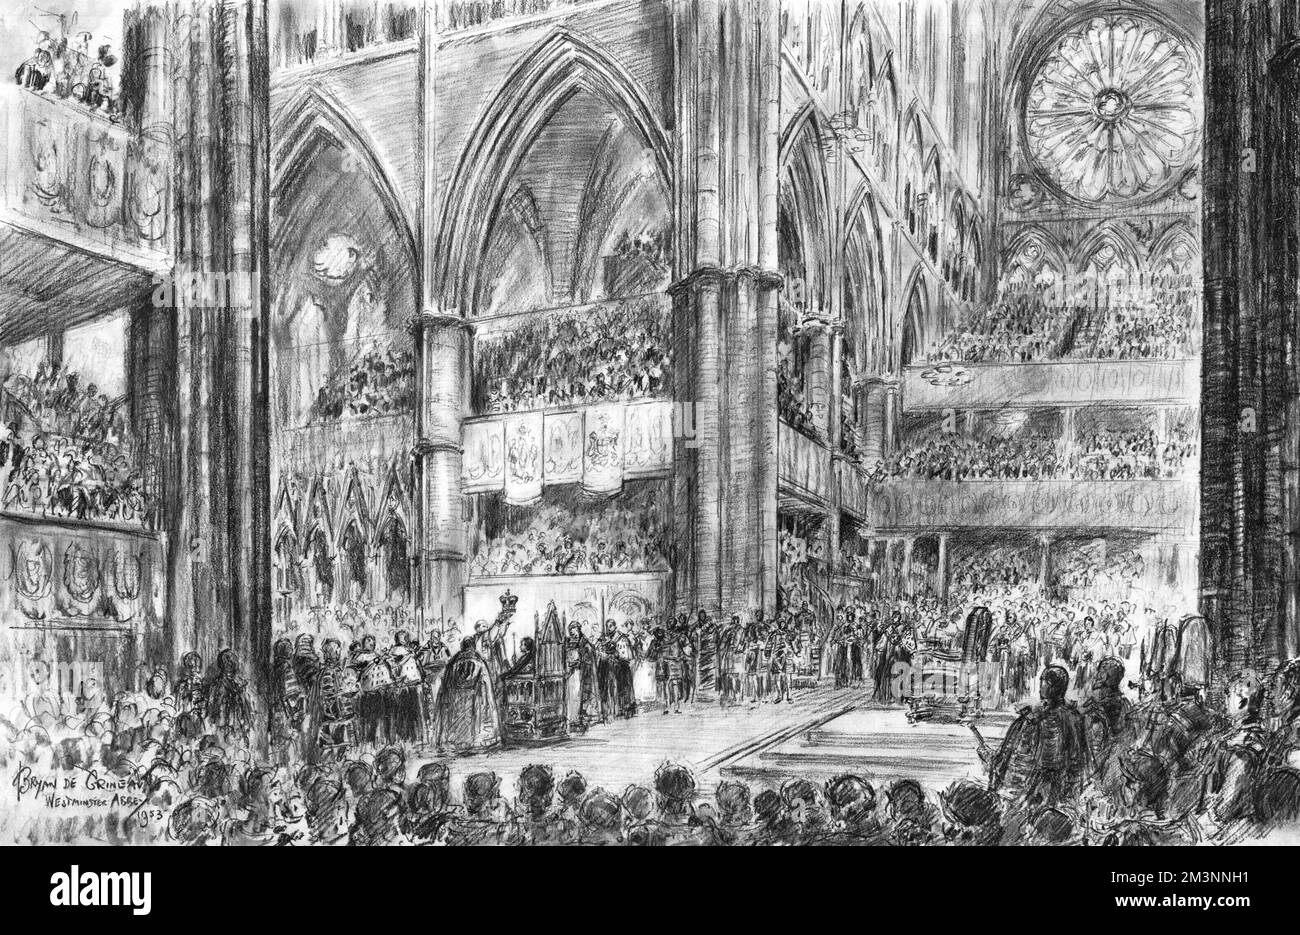 Spectacular illustration by ILN special artist, Bryan de Grineau, showing the supreme moment of the Coronation ceremony of Queen Elizabeth II in Westminster Abbey when the Archbishop of Canterbury reverently placed St Edward's Crown on the head of the monarch.       Date: 1953 Stock Photo